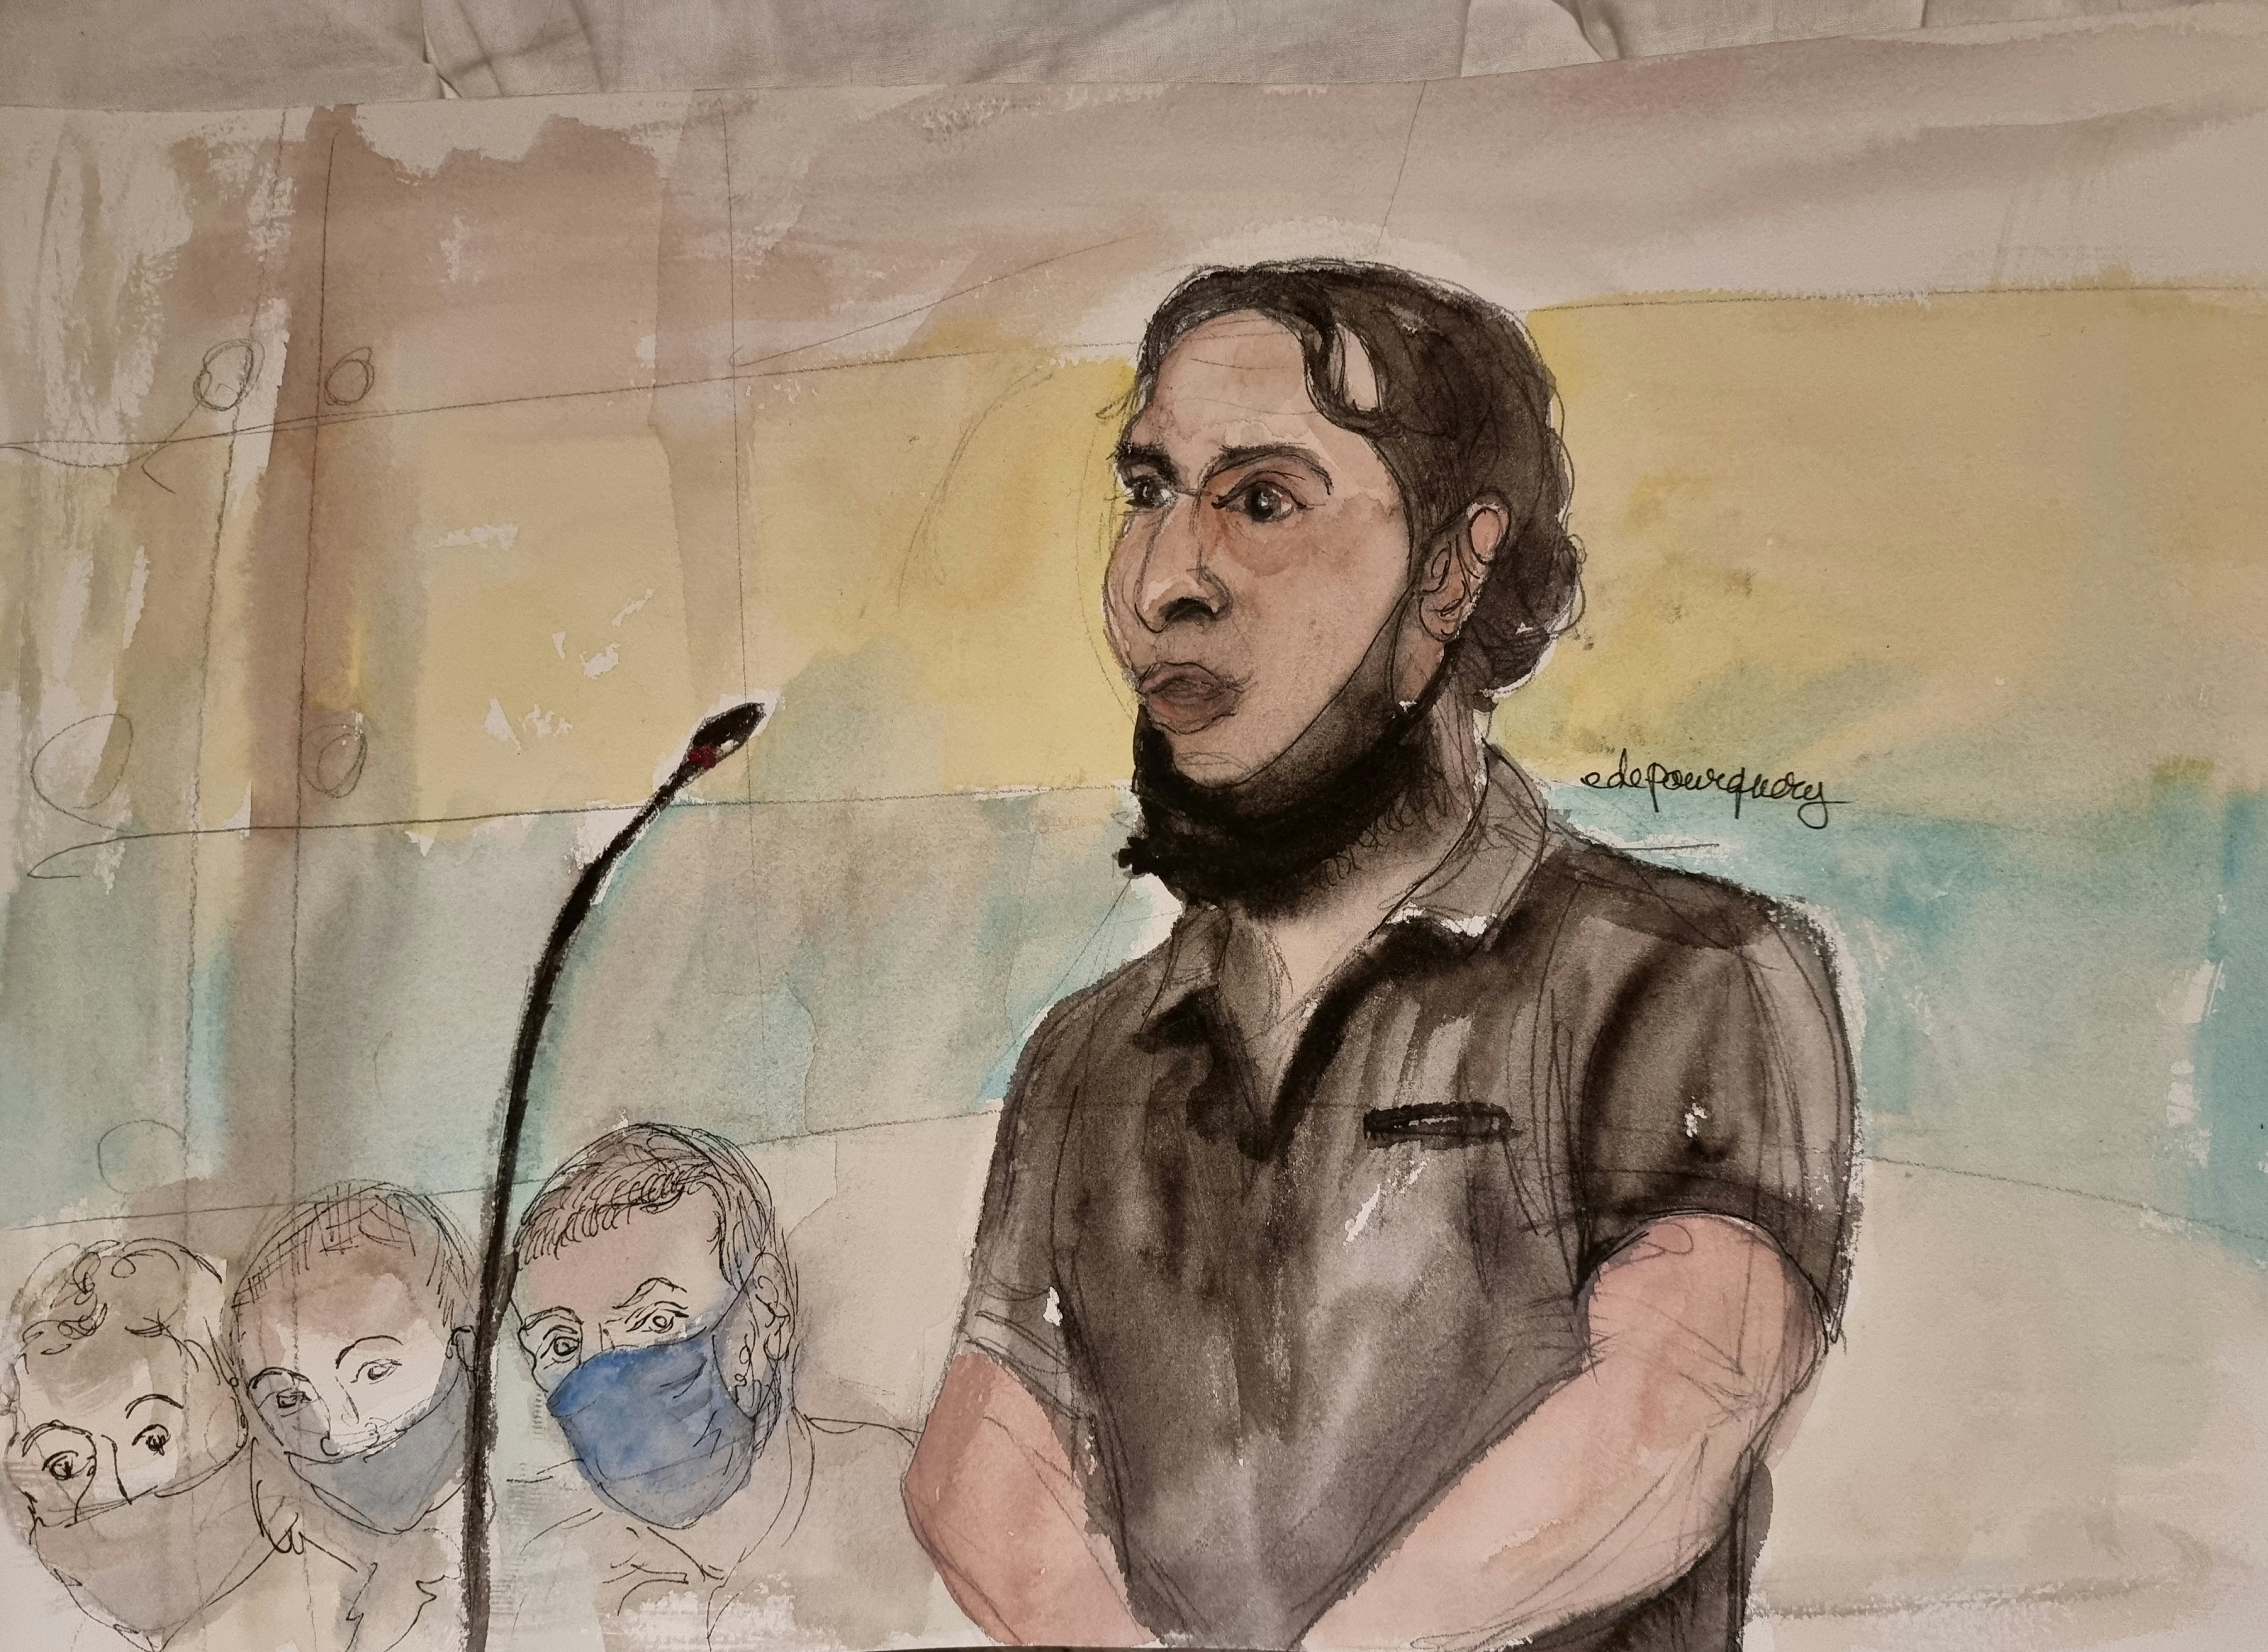 An artist’s sketch shows Salah Abdeslam, one of the accused, who is widely believed to be the only surviving member of the group suspected of carrying out the Paris attacks in November 2015